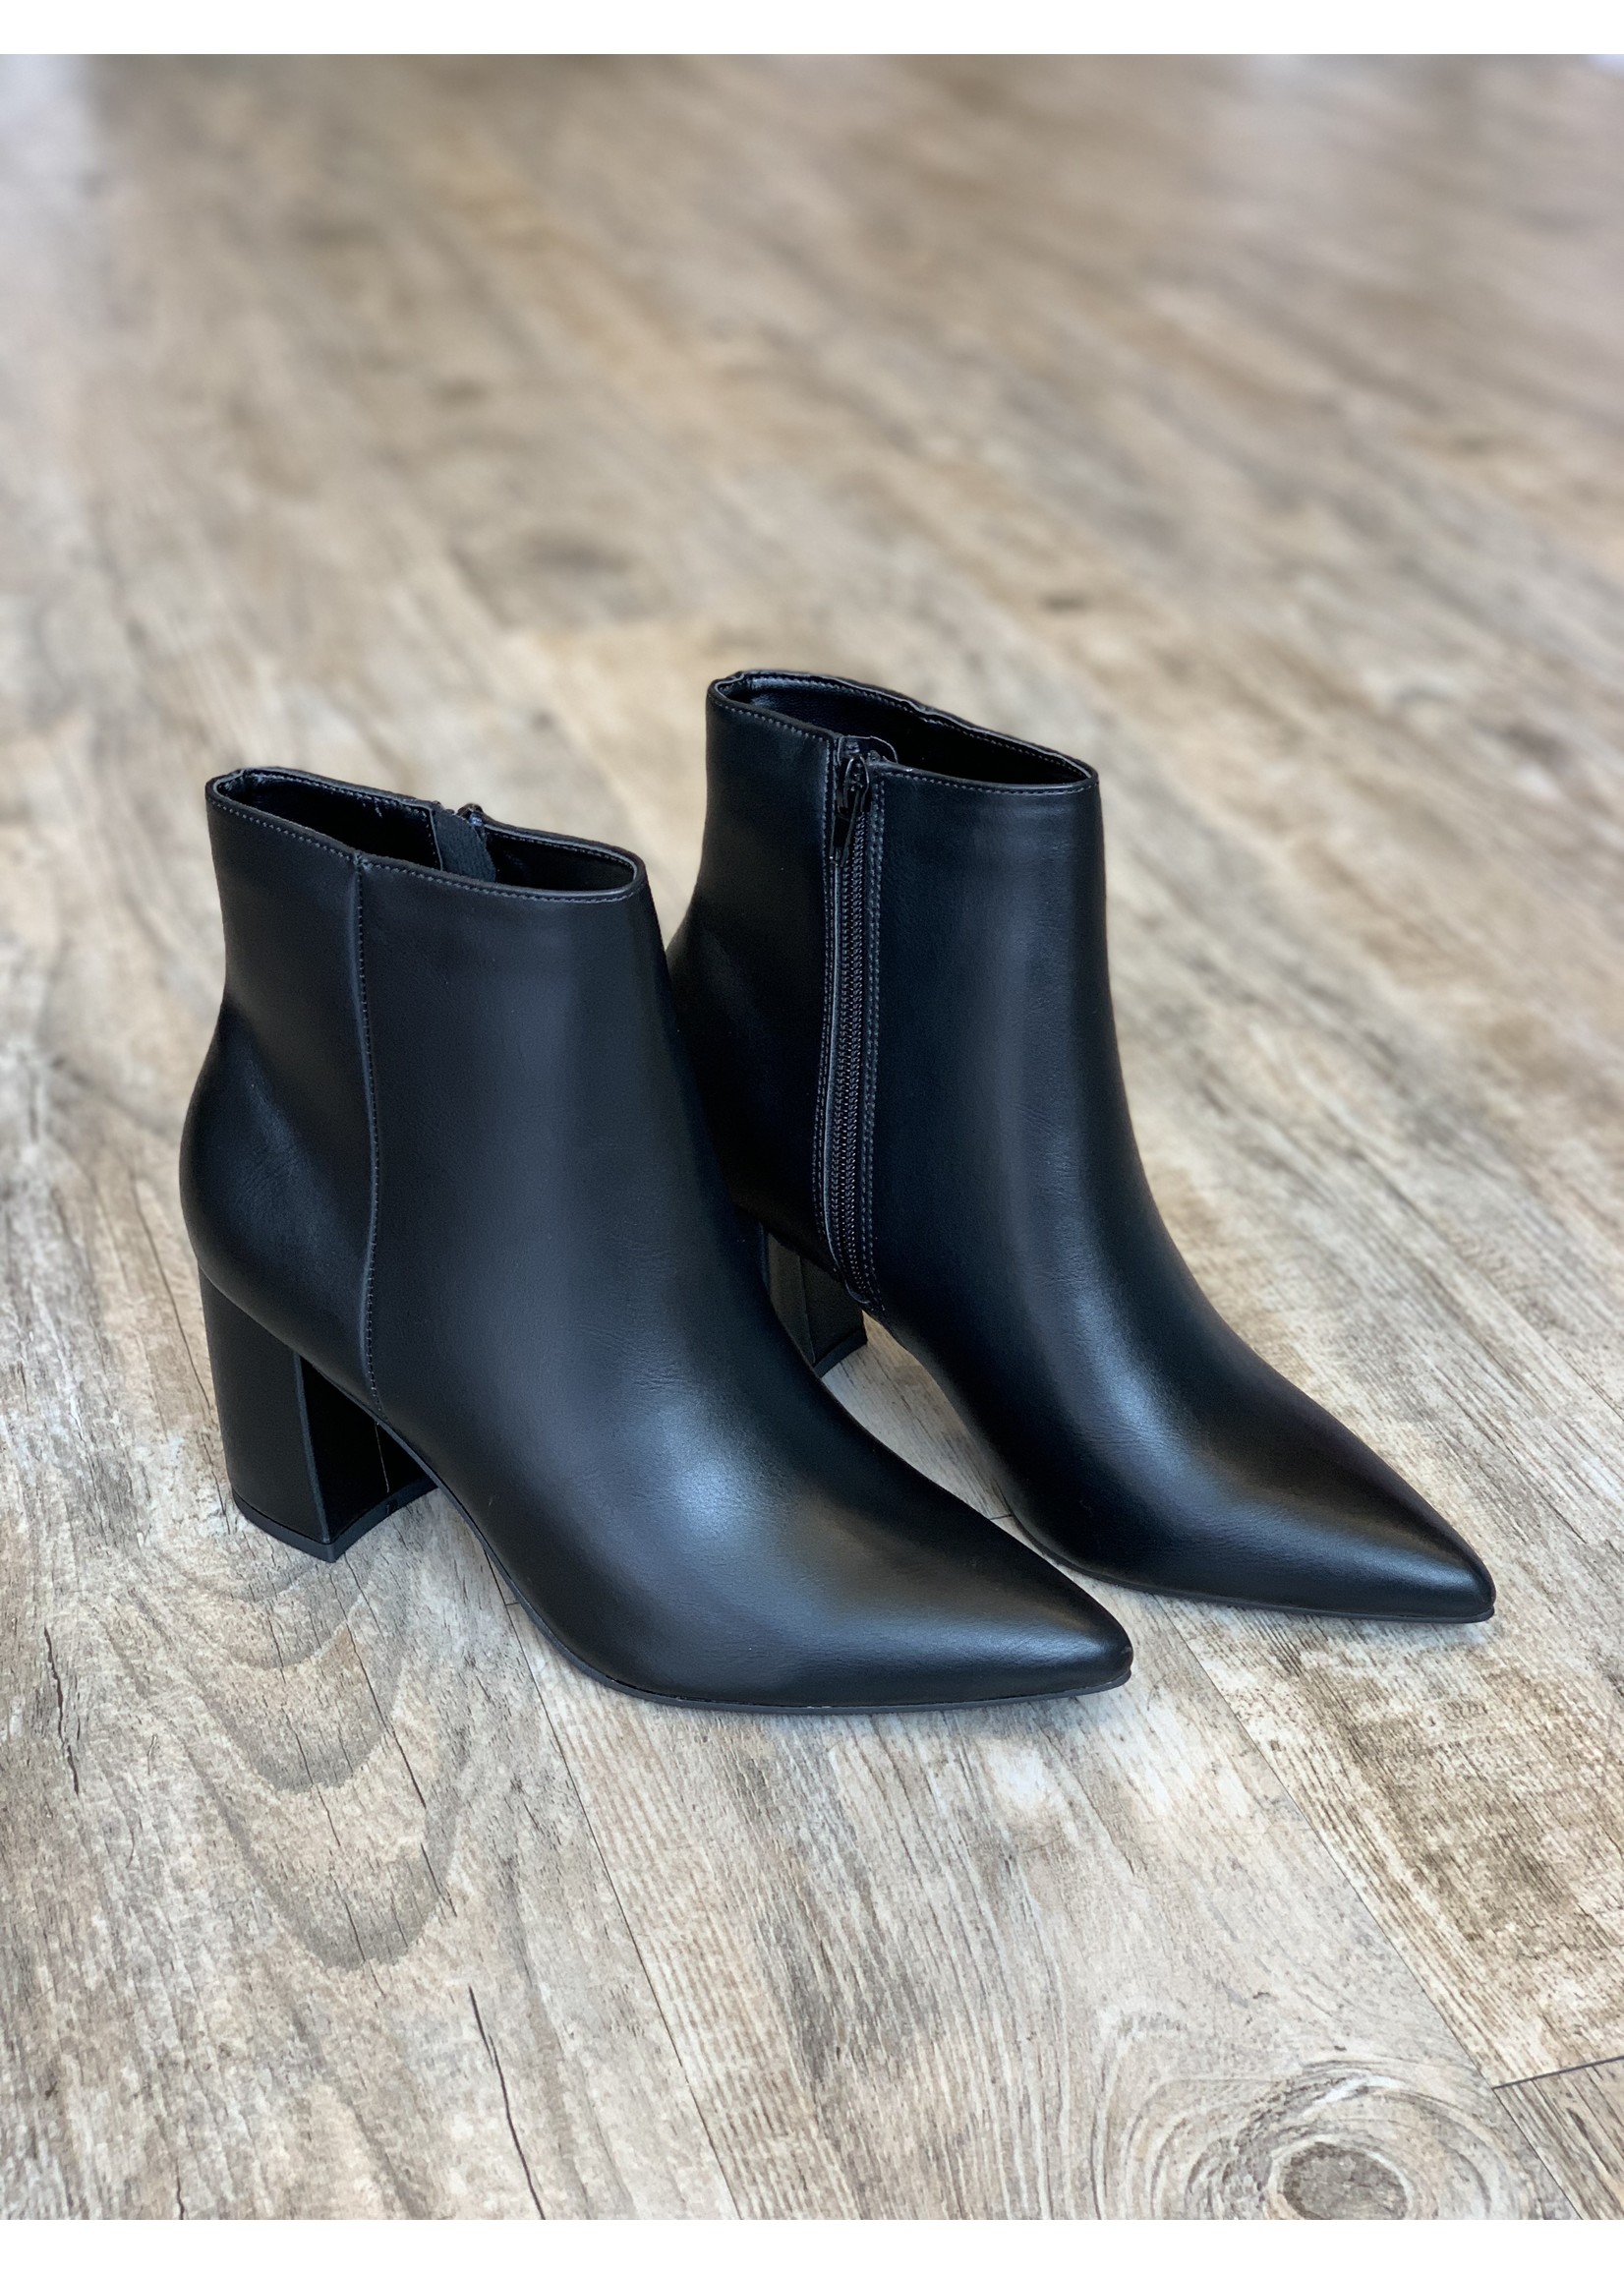 The Hillary Faux Leather Booties